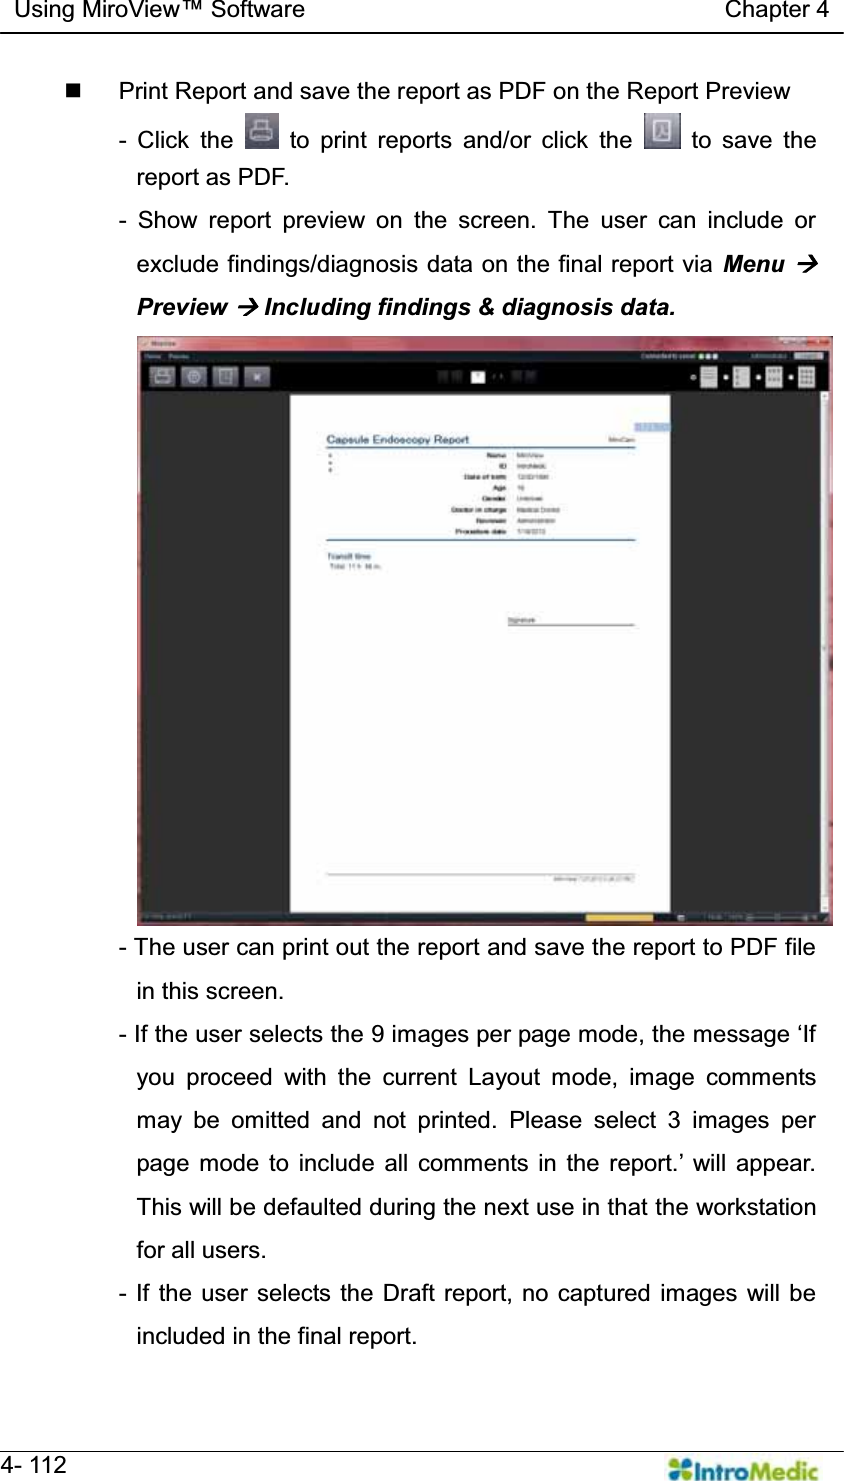   Using MiroView Software                                   Chapter 4   4- 112   Print Report and save the report as PDF on the Report Preview - Click the   to print reports and/or click the   to save the report as PDF. - Show report preview on the screen. The user can include or exclude findings/diagnosis data on the final report via Menu Æ Preview Æ Including findings &amp; diagnosis data. - The user can print out the report and save the report to PDF file in this screen. - IIWKHXVHUVHOHFWVWKHLPDJHVSHUSDJHPRGHWKHPHVVDJHµ,Iyou proceed with the current Layout mode, image comments may be omitted and not printed. Please select 3 images per SDJH PRGH WR LQFOXGH DOO FRPPHQWV LQ WKH UHSRUW¶ ZLOO DSSHDUThis will be defaulted during the next use in that the workstation for all users. - If the user selects the Draft report, no captured images will be included in the final report. 